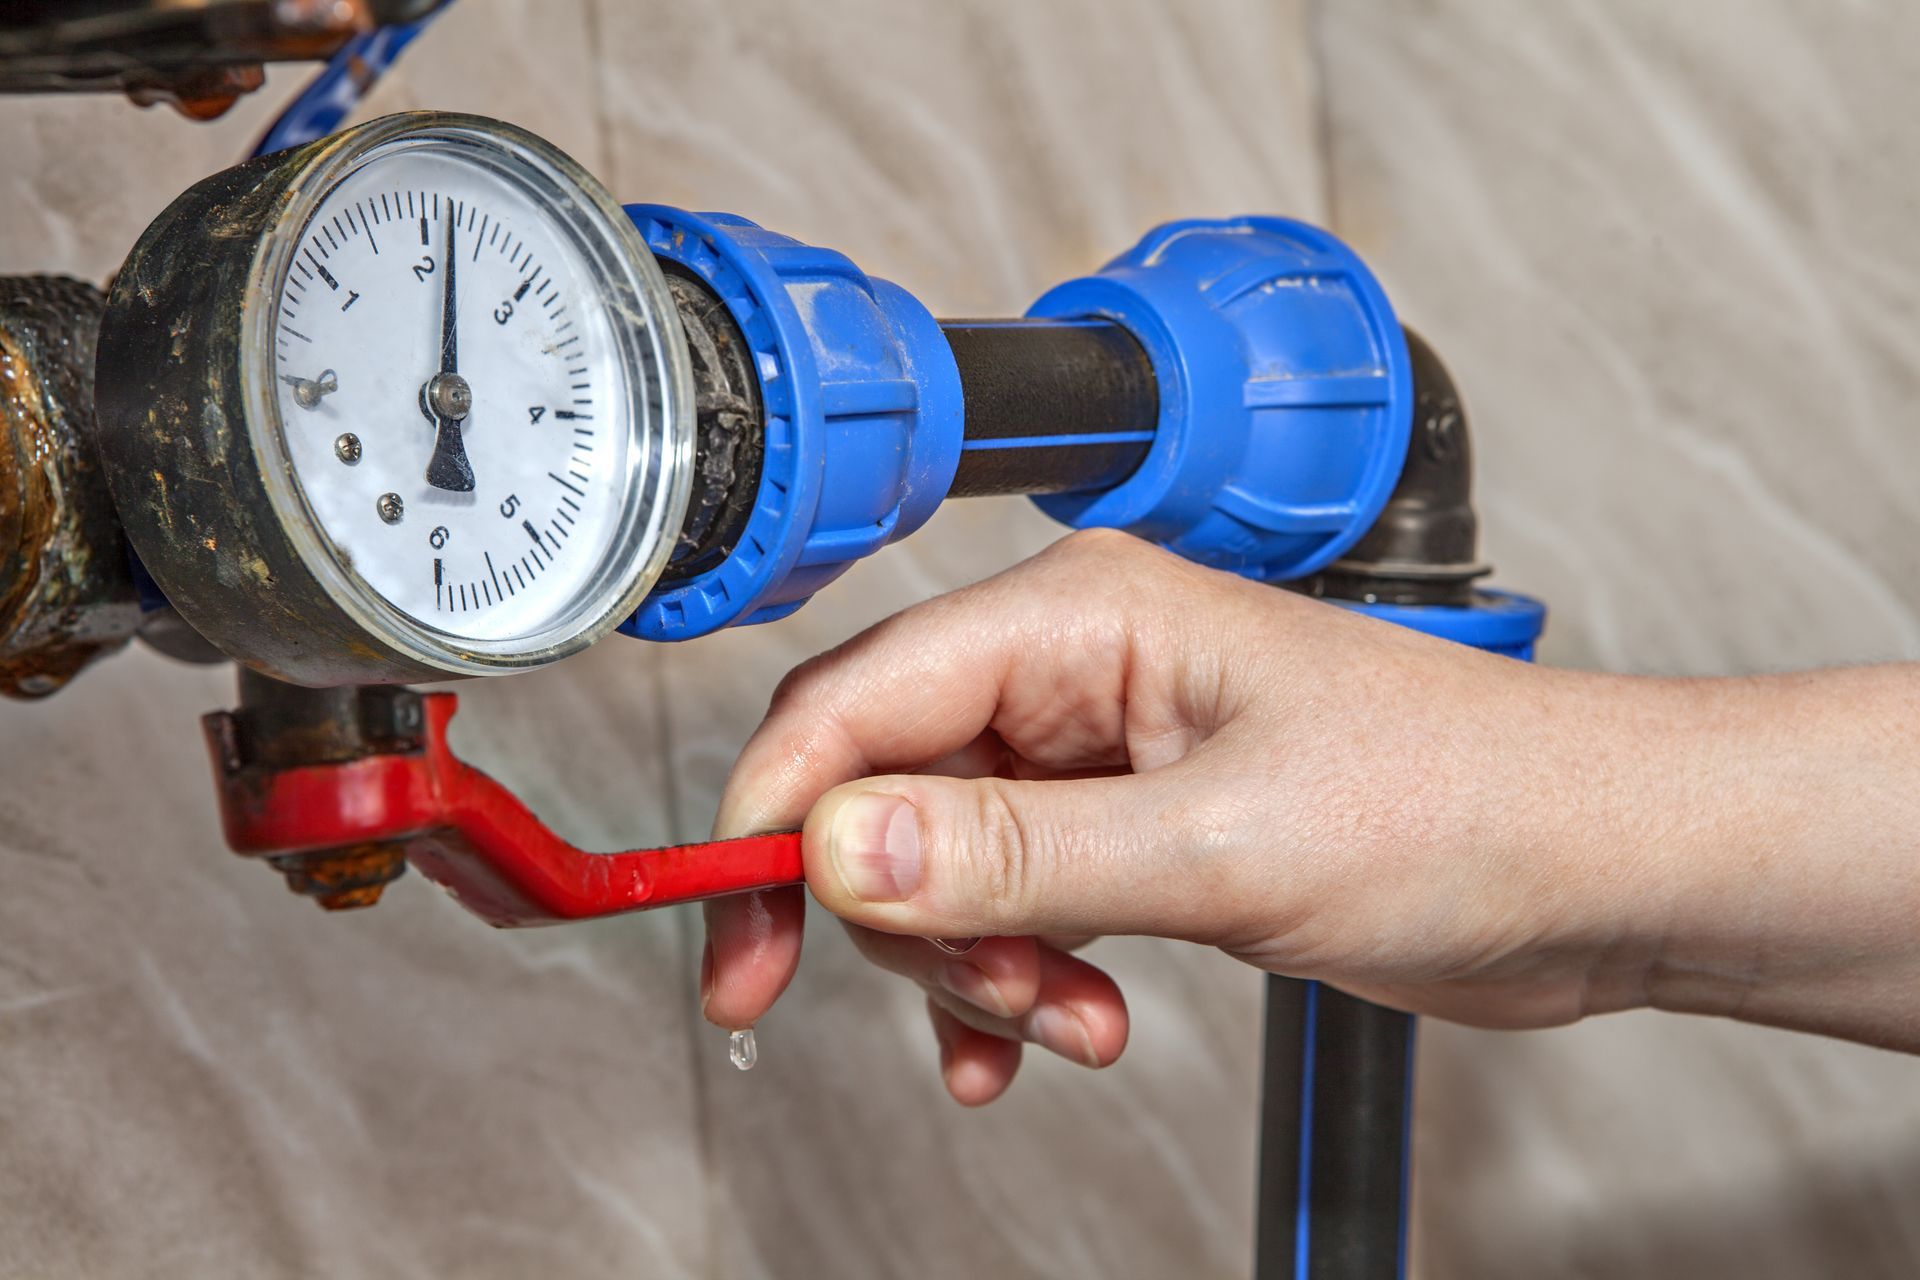 a person is adjusting a pressure gauge on a pipe